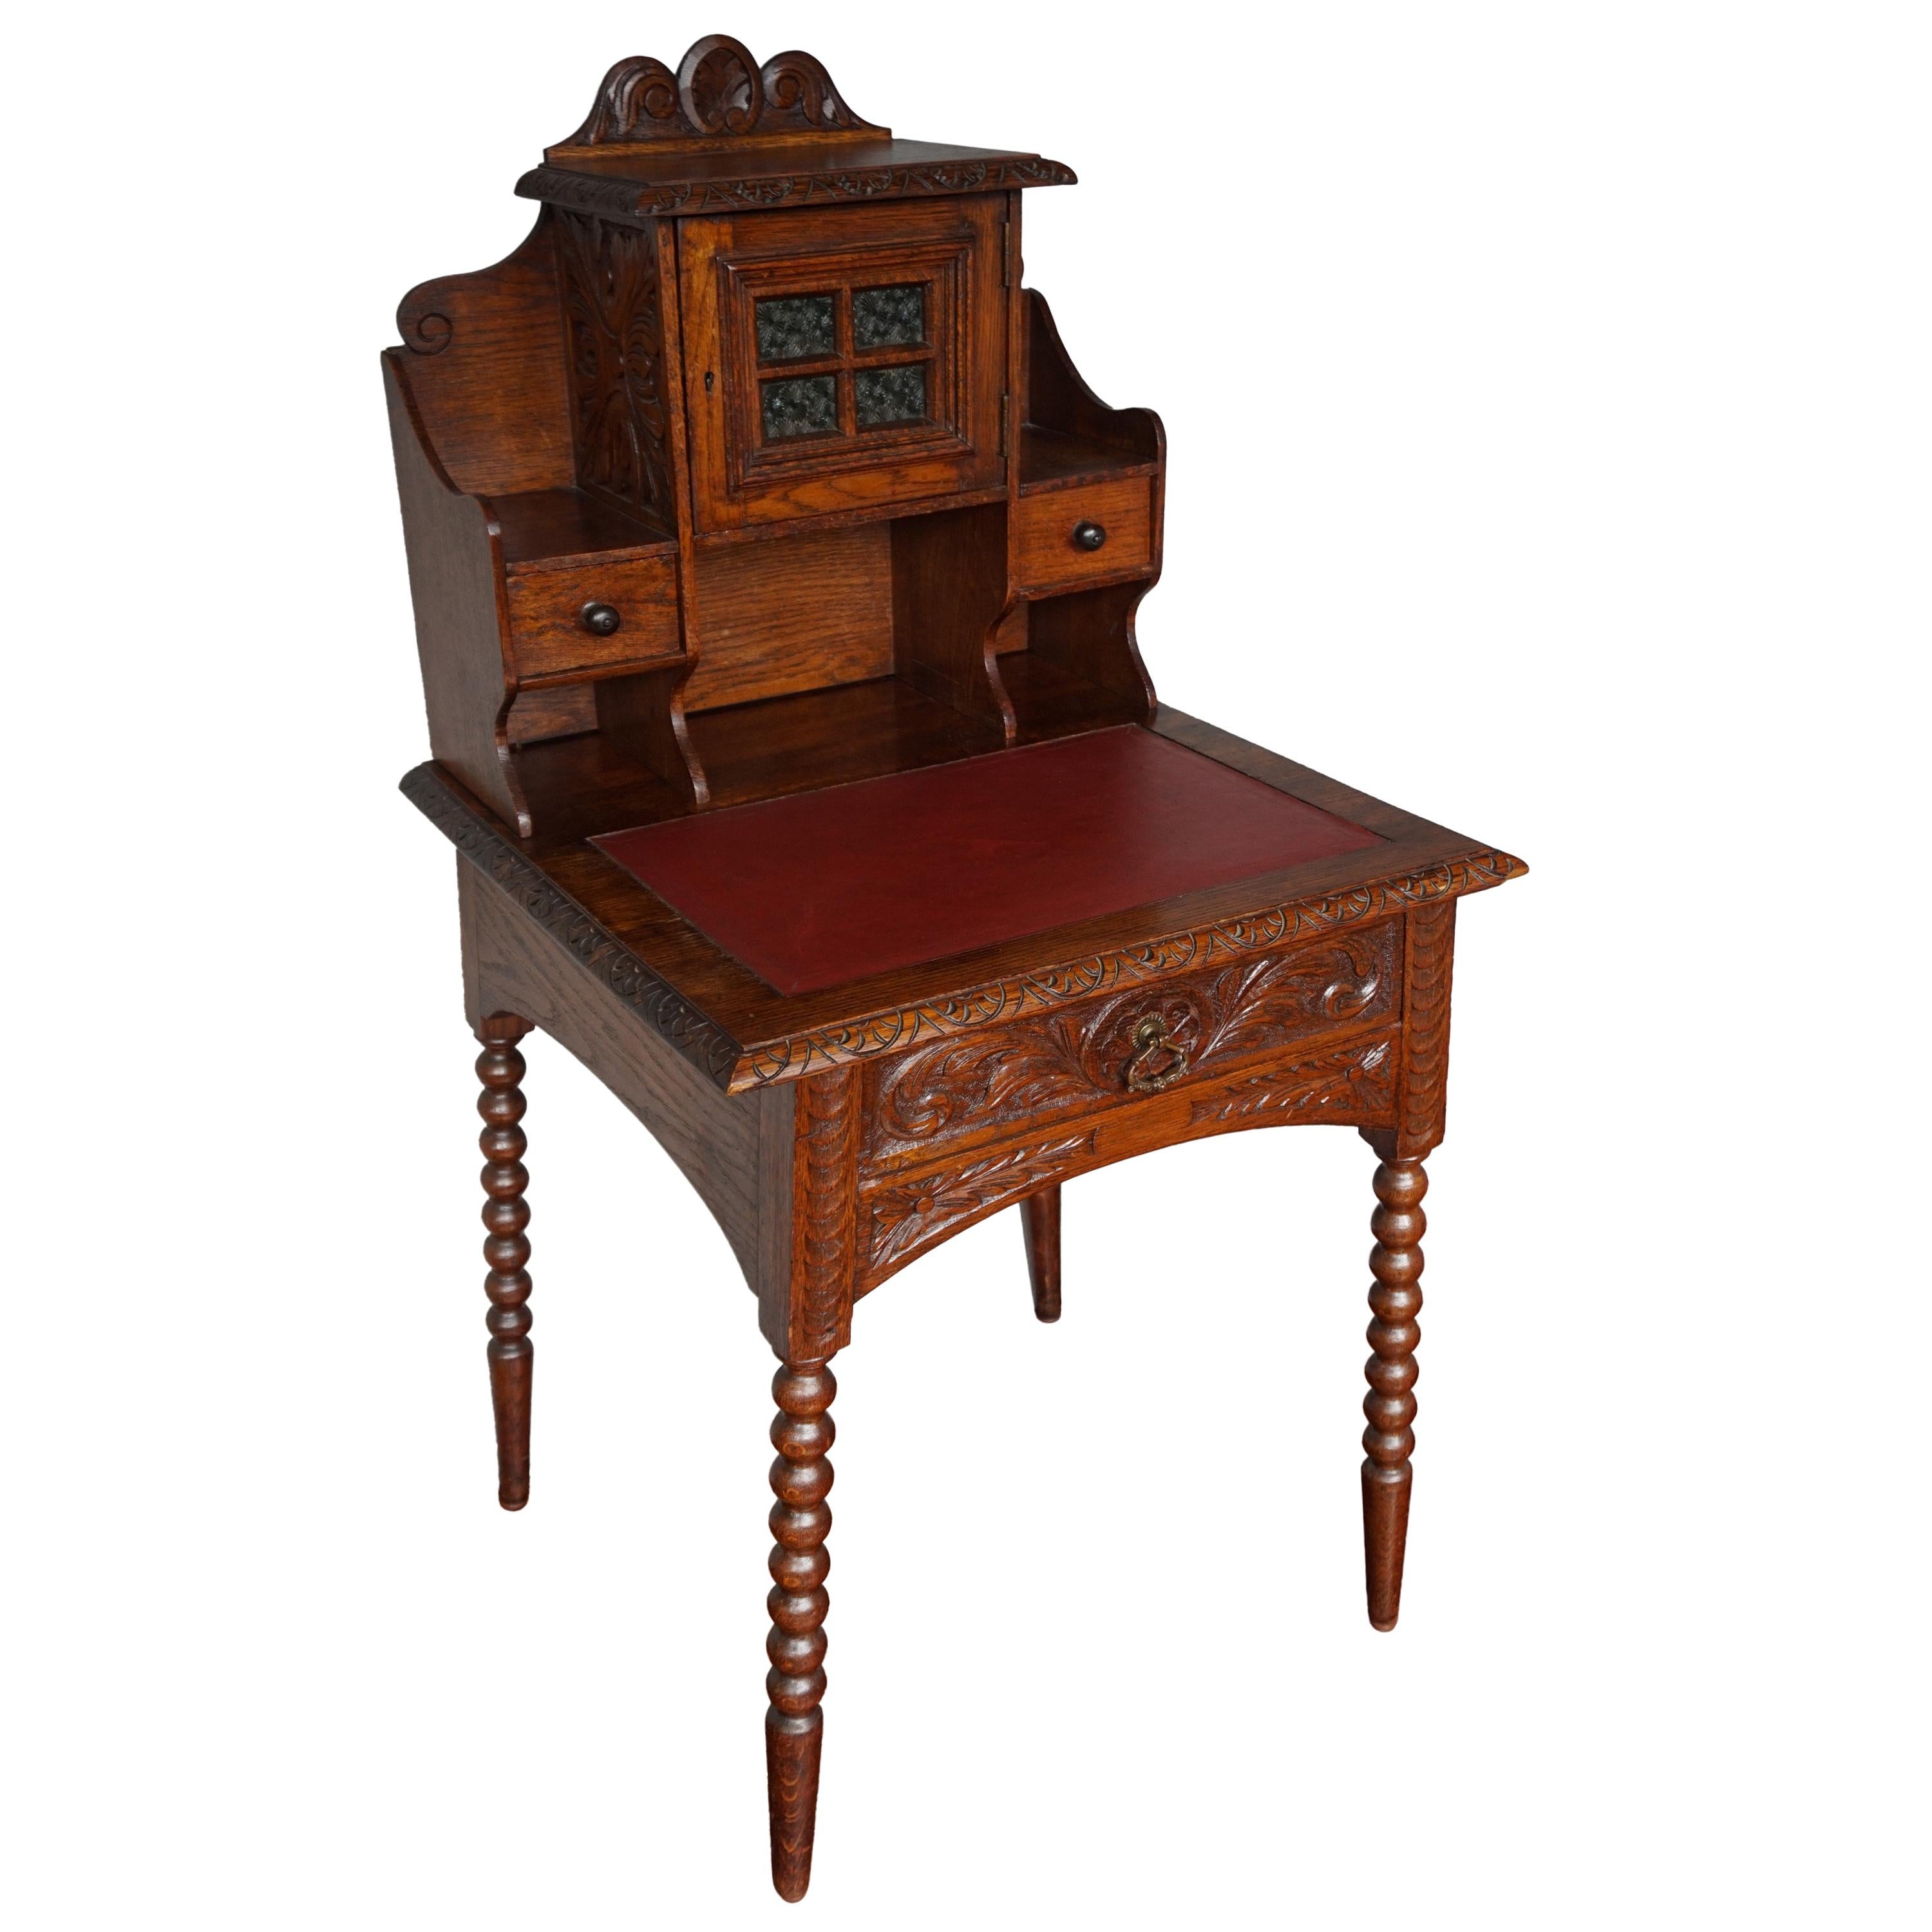 Perfectly Hand Carved Arts & Crafts Oak Ladies Desk with Red Leather Inlaid Top